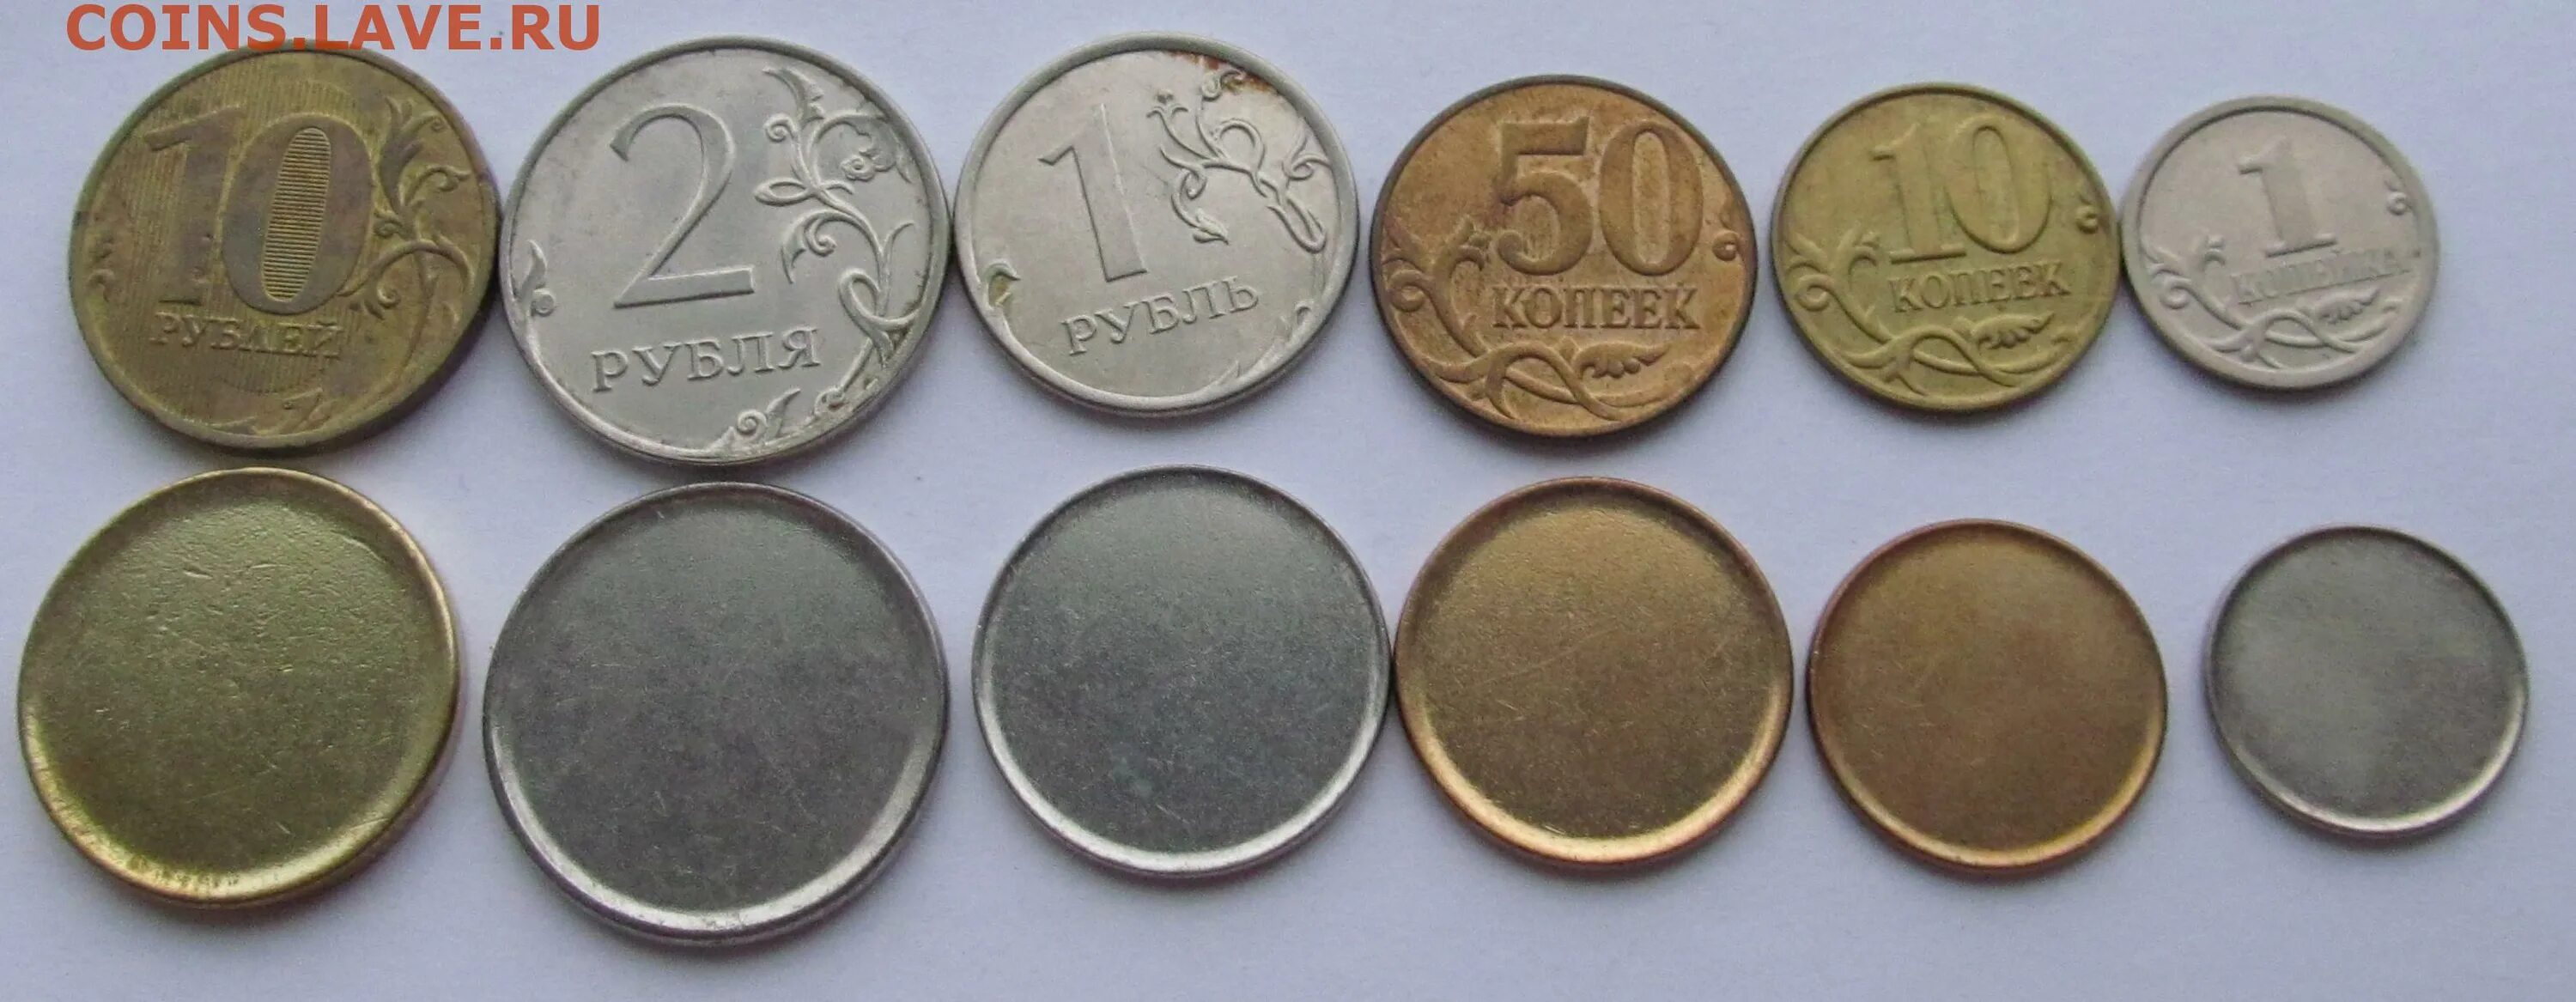 Coins lave форум